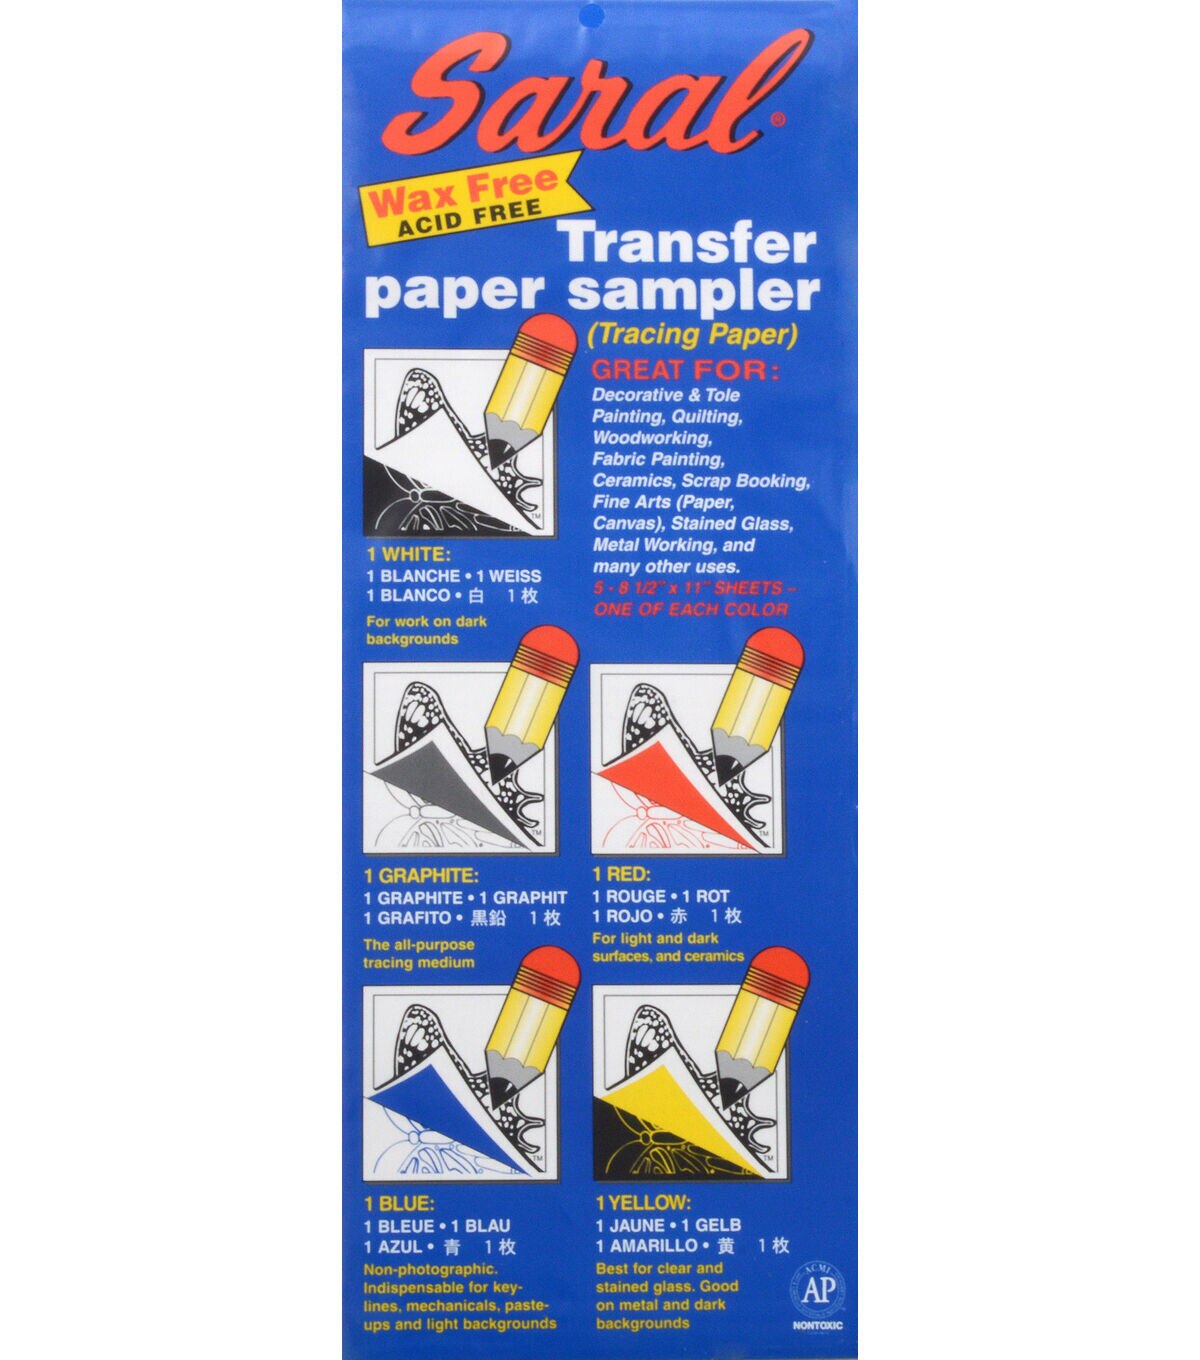 8-1/2 X 12" Sheets 5 Colors Sally's by Saral Wax-Free Transfer Paper Sampler 